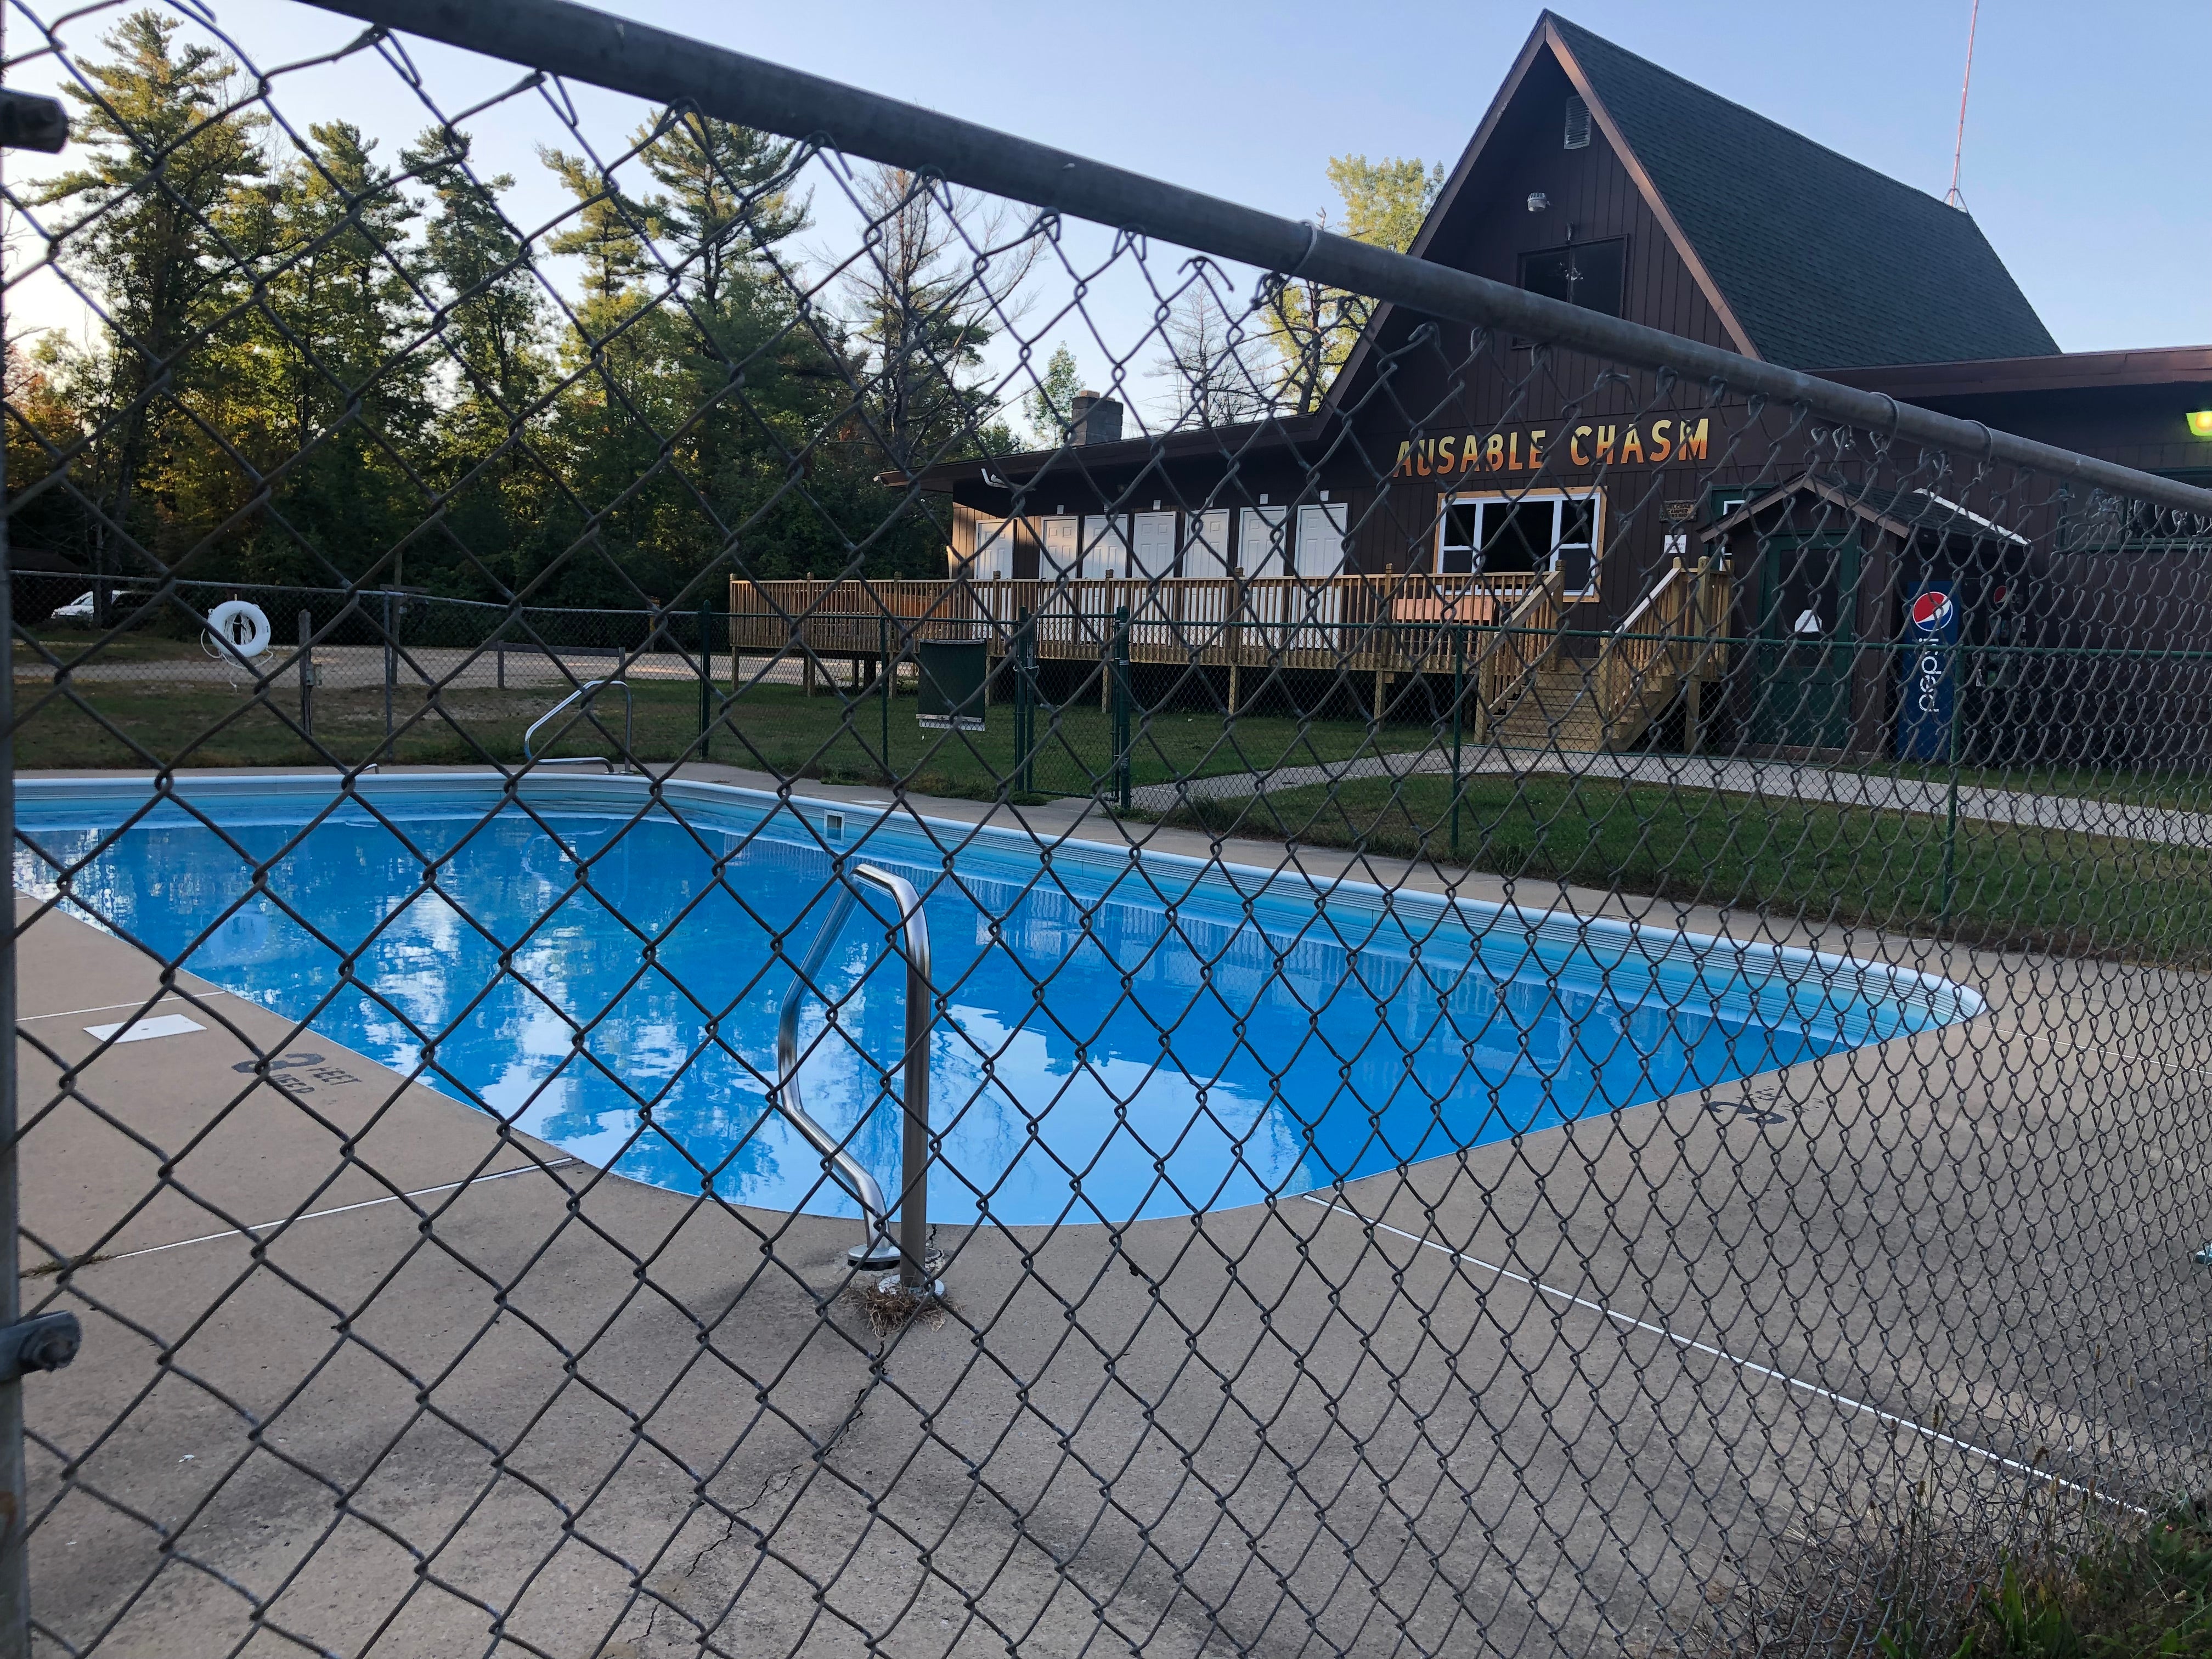 The pool was still open after Labor Day